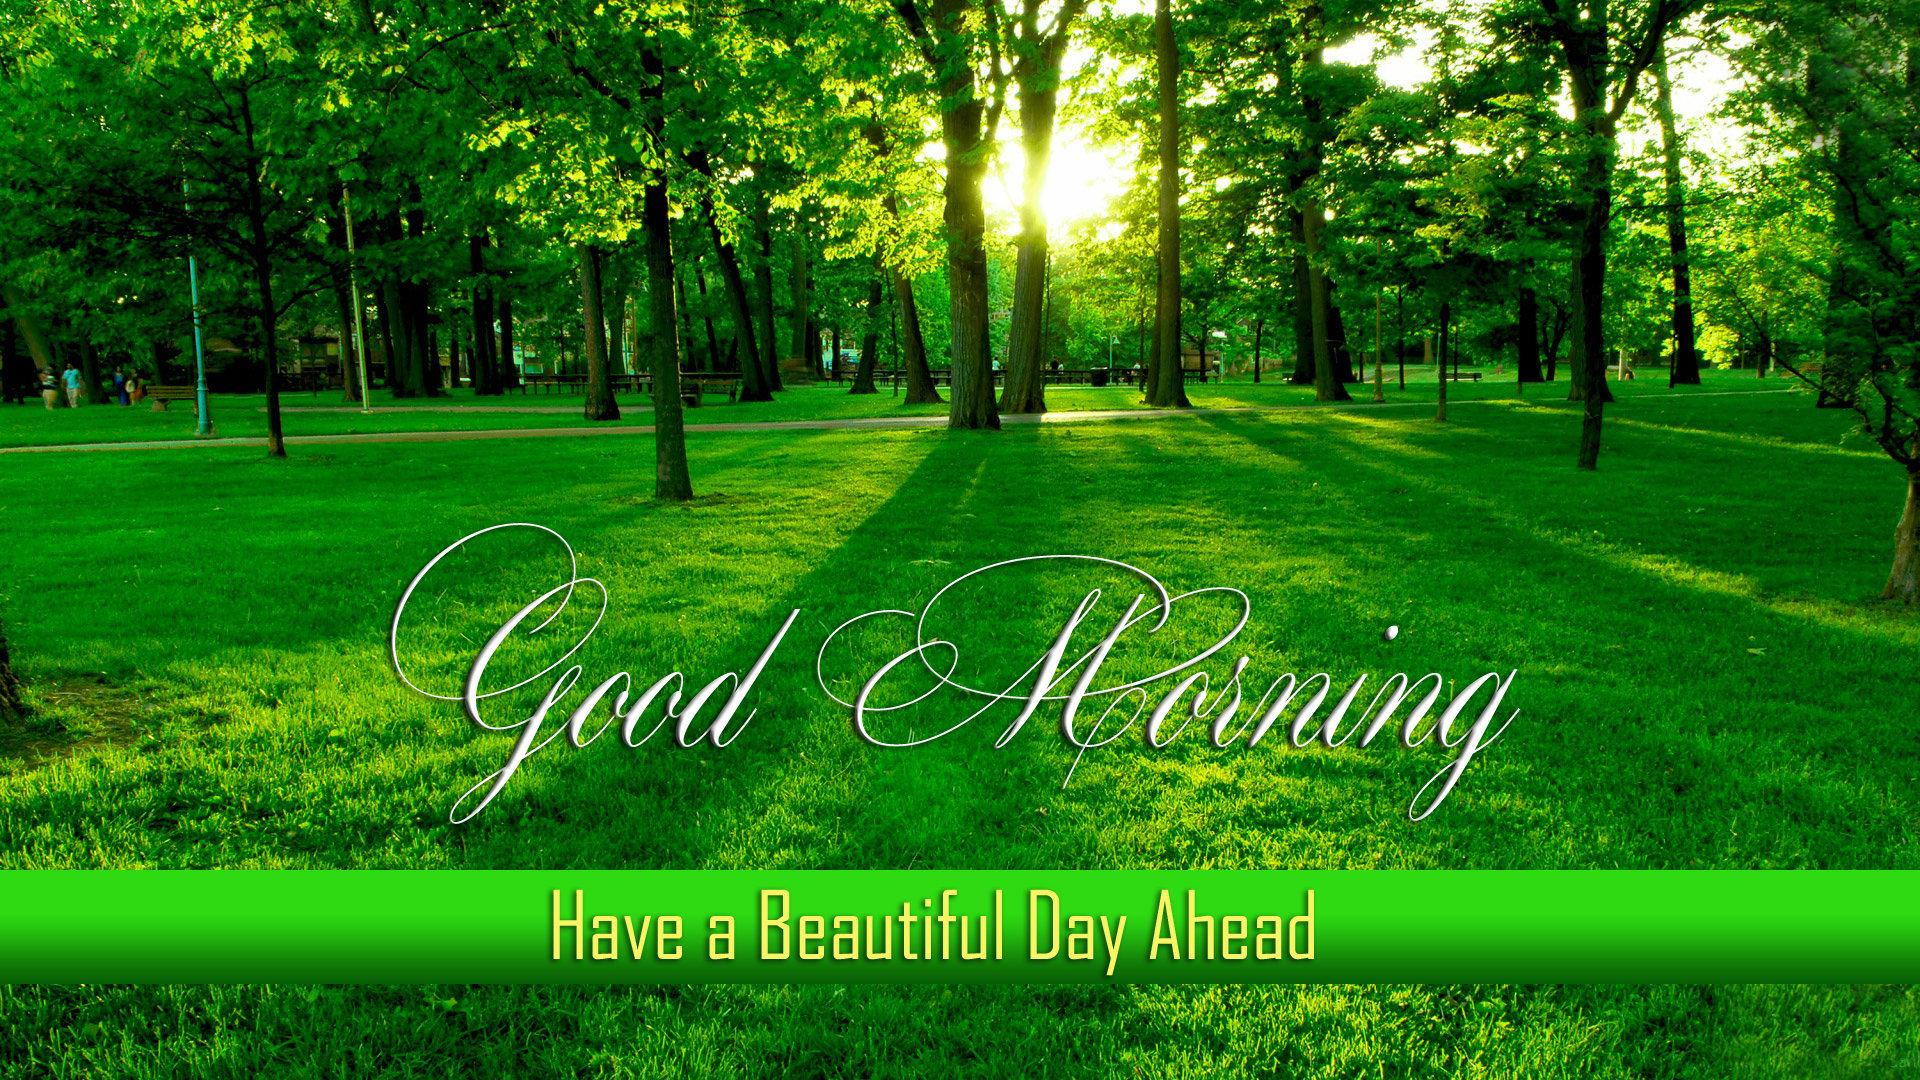 Beautiful Good Morning Wallpapers submited images